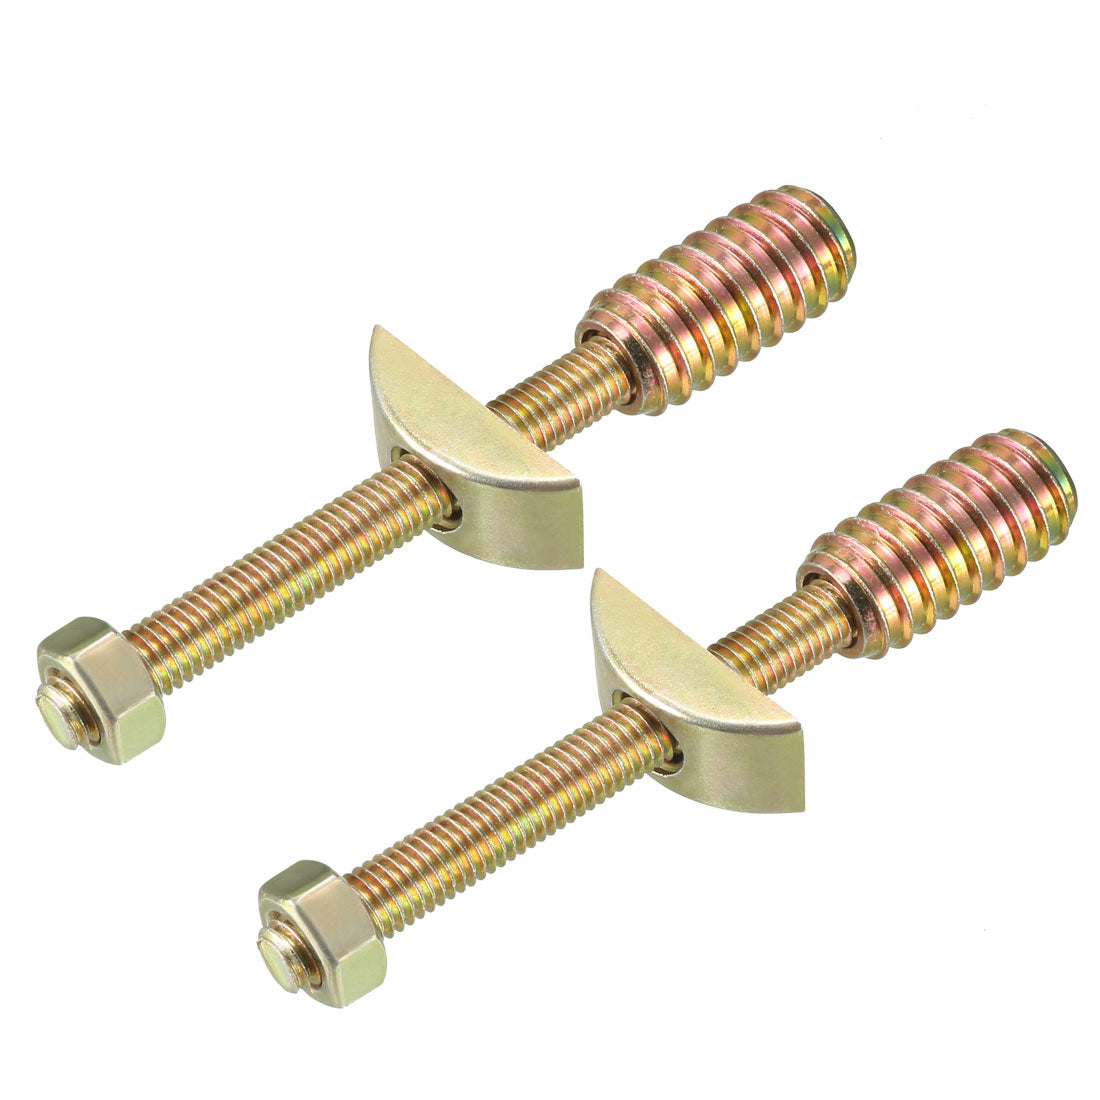 uxcell Uxcell 2 Sets Furniture Hardware Zinc Plated Half-Moon Nut Connecting Fitting Bronze Tone